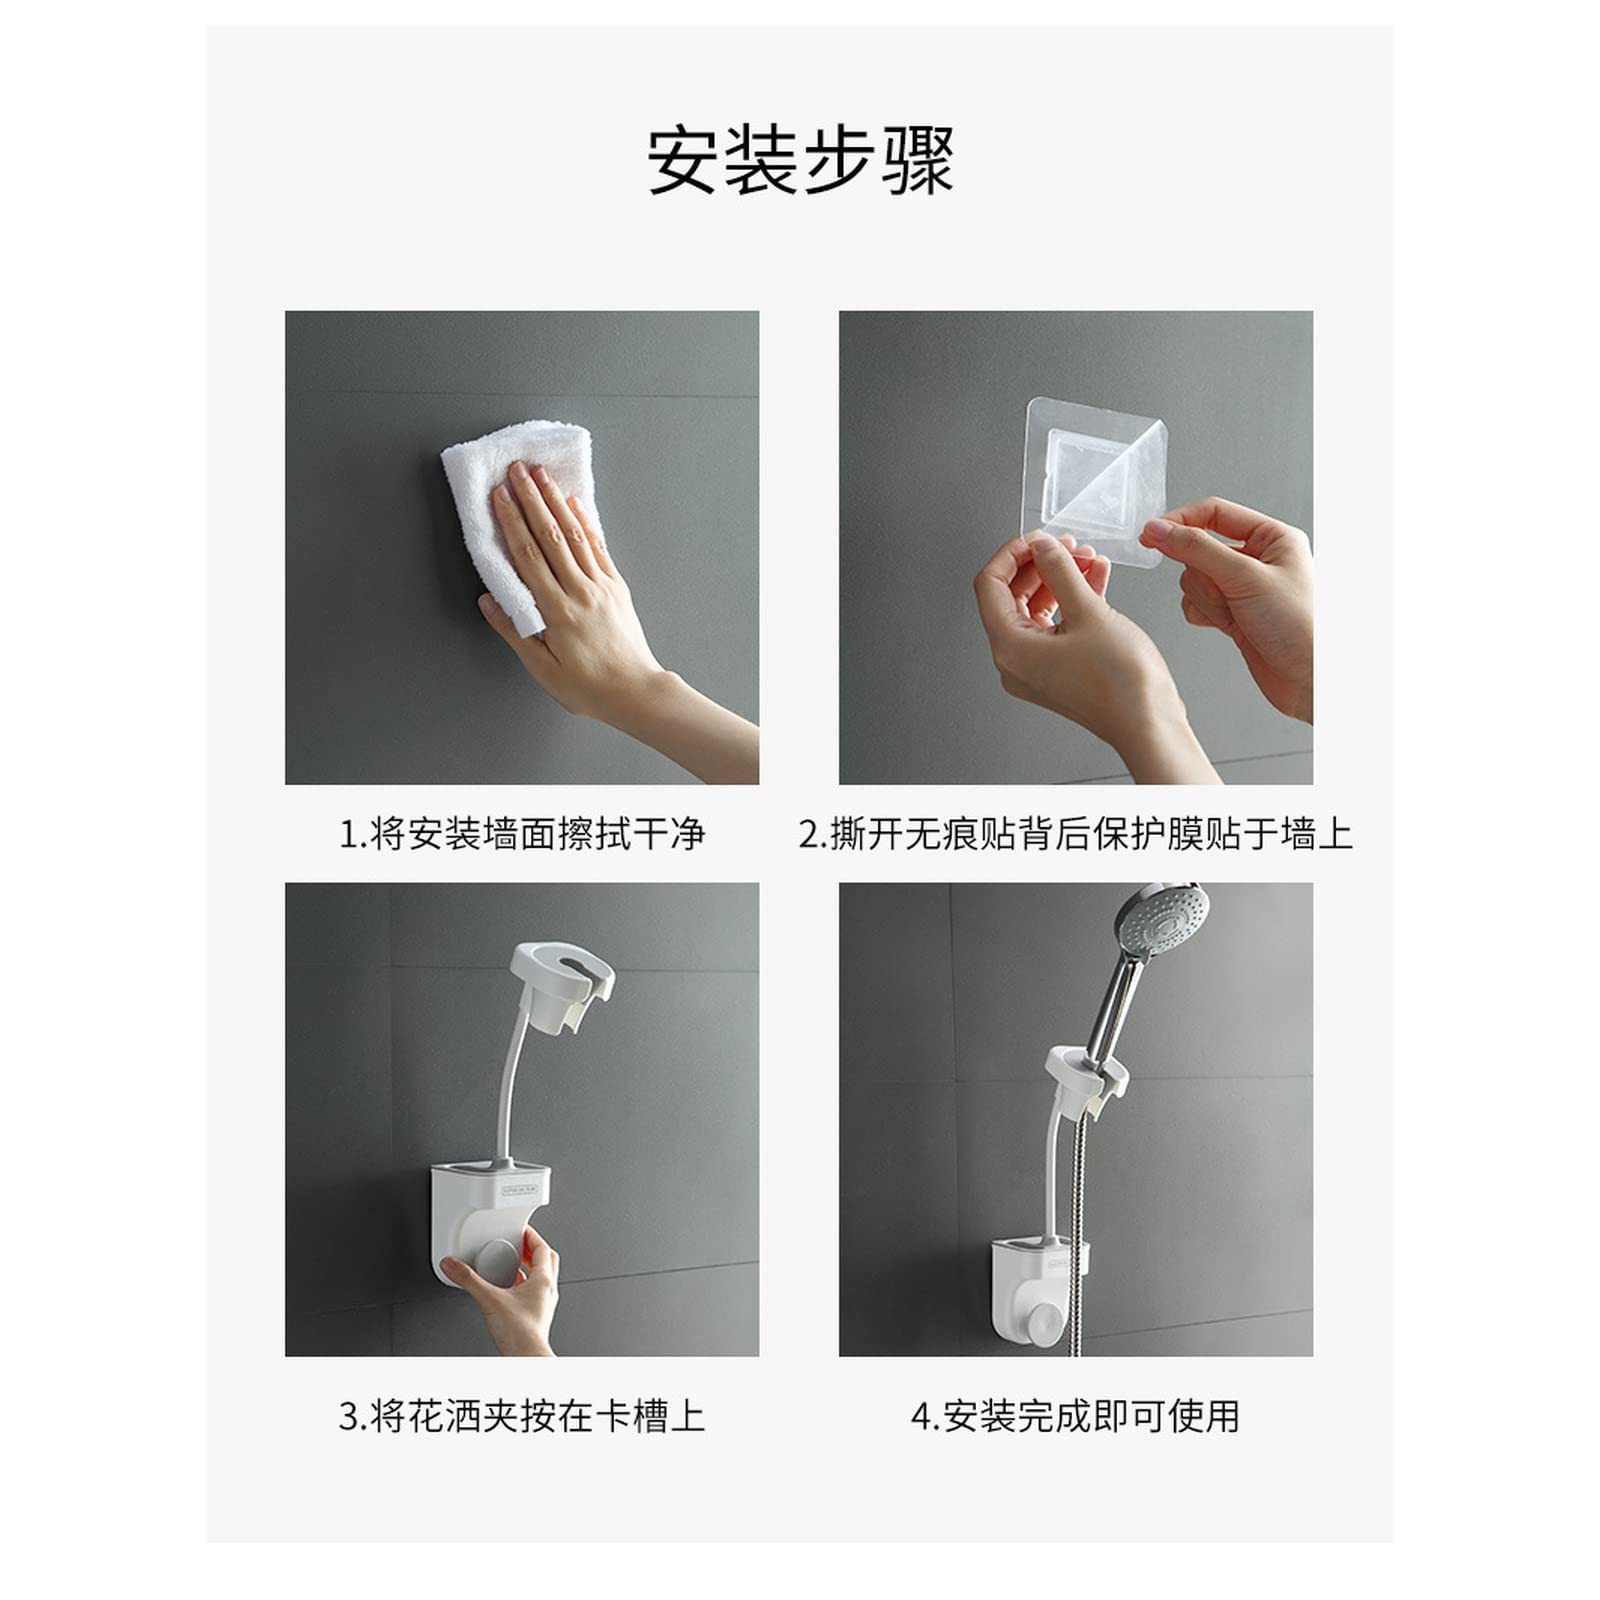 Hair Dryer Stand, Adjustable Lazy Hands Free Hair Dryer Shelf, Wall Mounted Hole Free Hair Dryer Rack